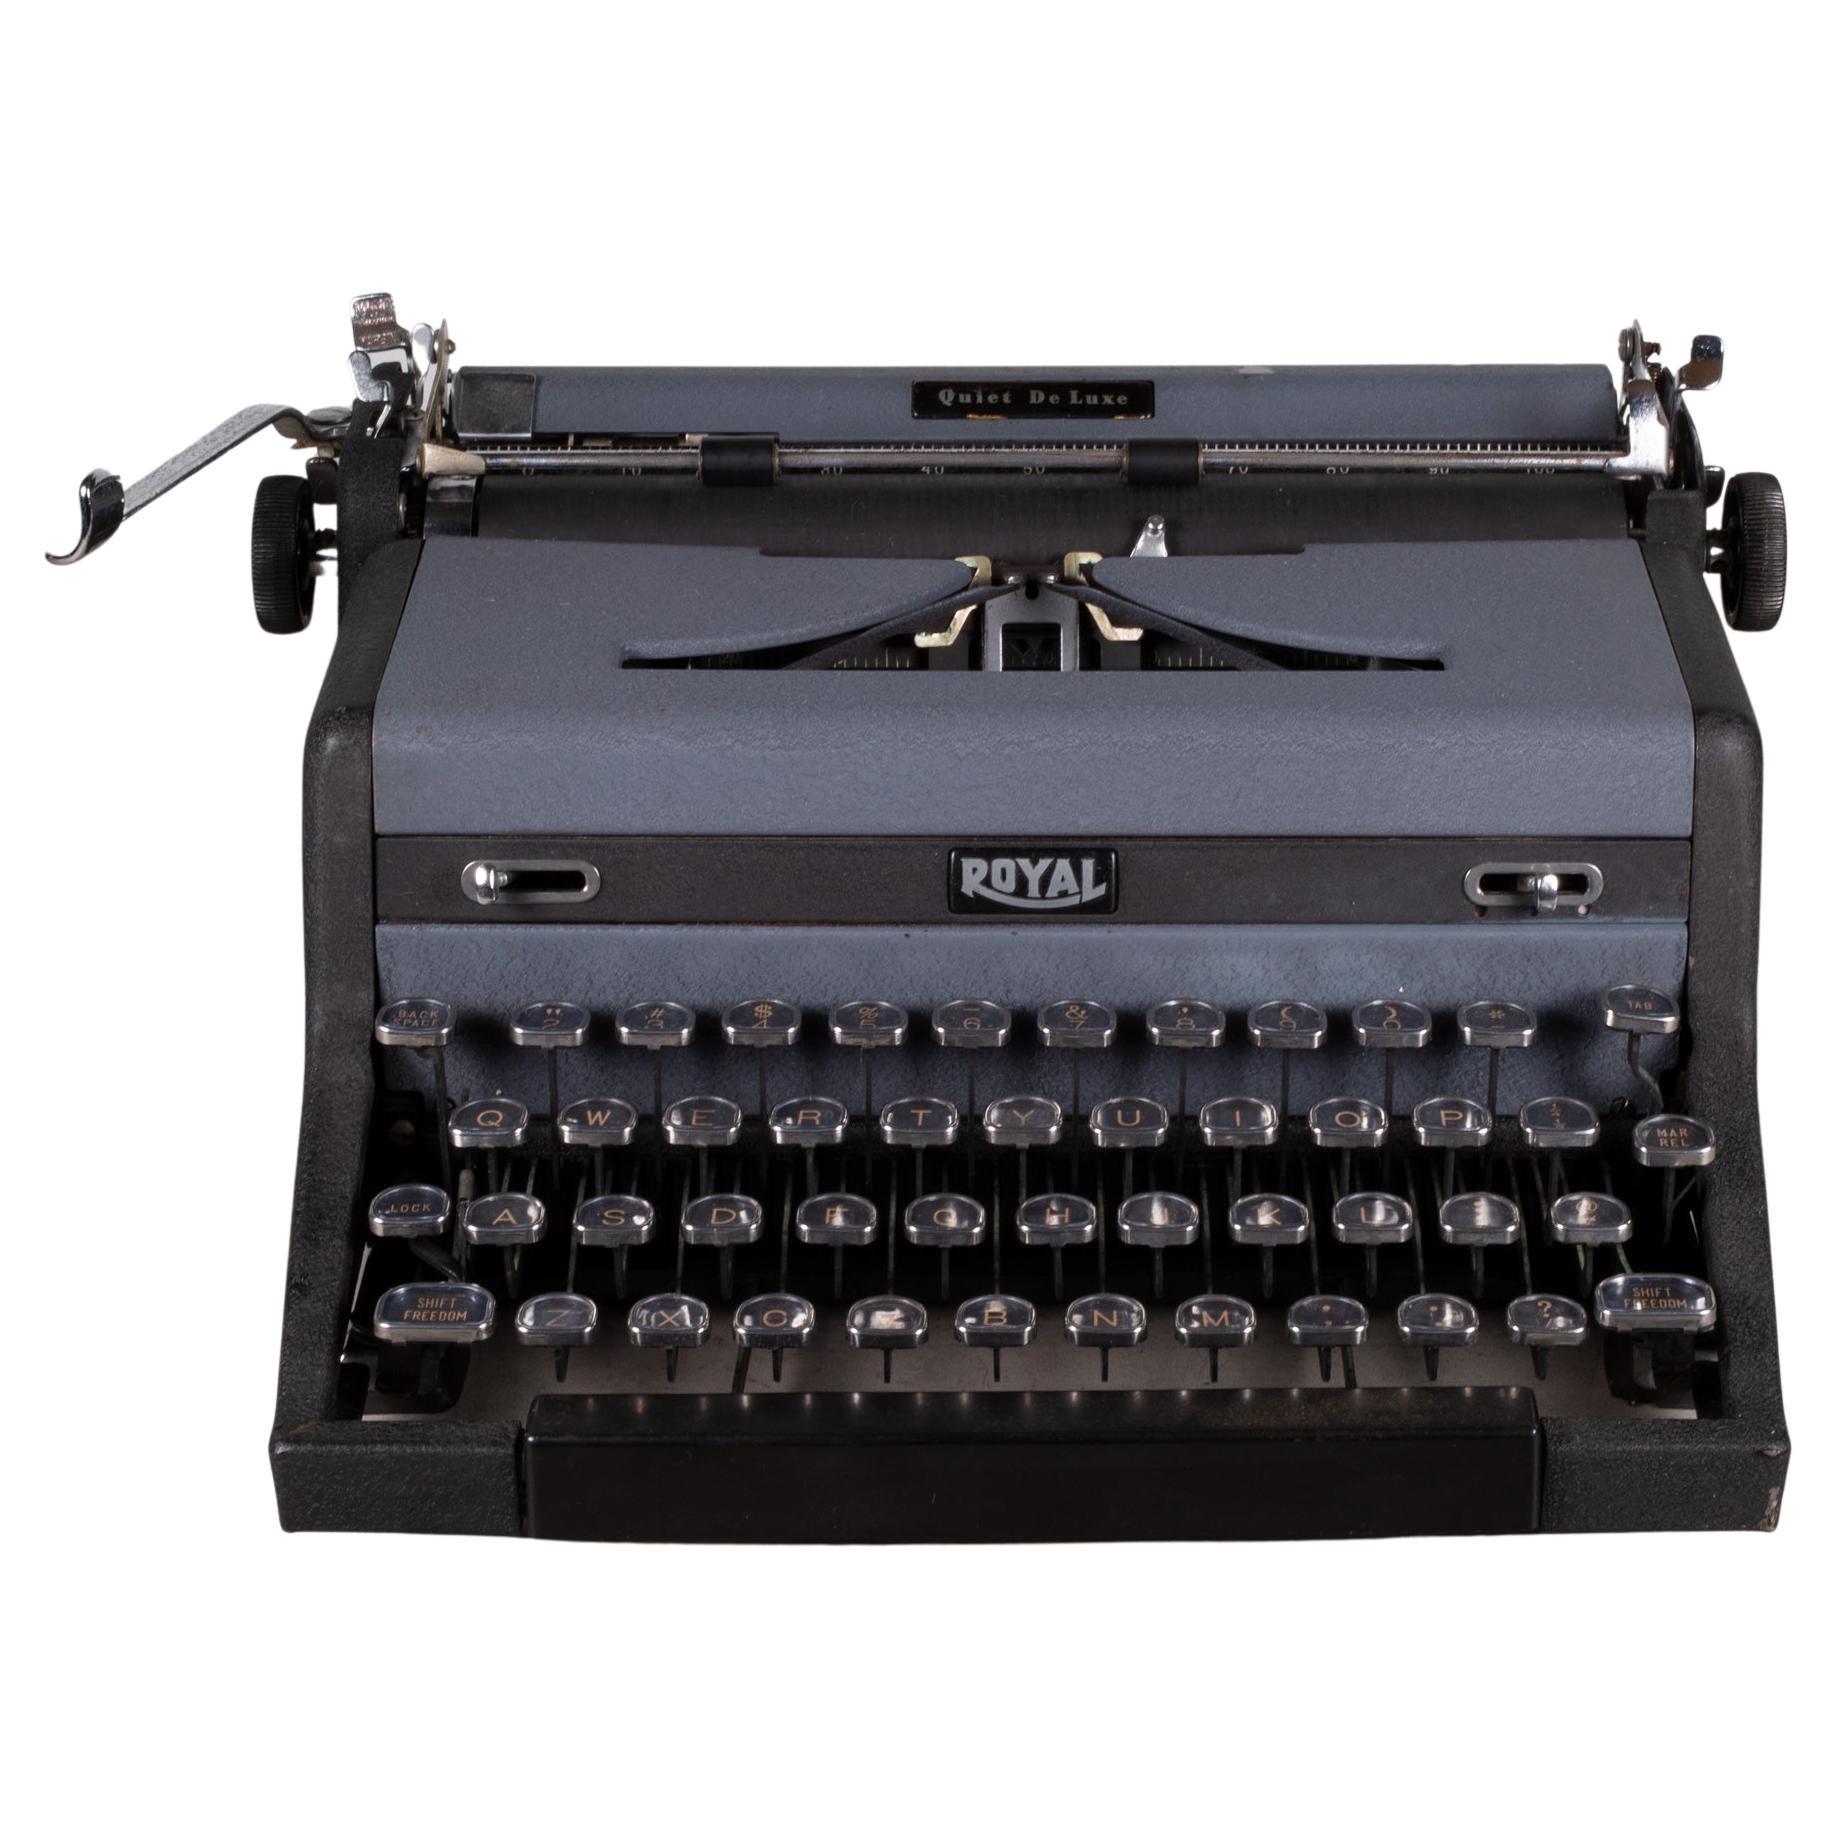 Royal Quiet DeLuxe Two Tone Typewriter and Case, c.1948  (FREE SHIPPING)